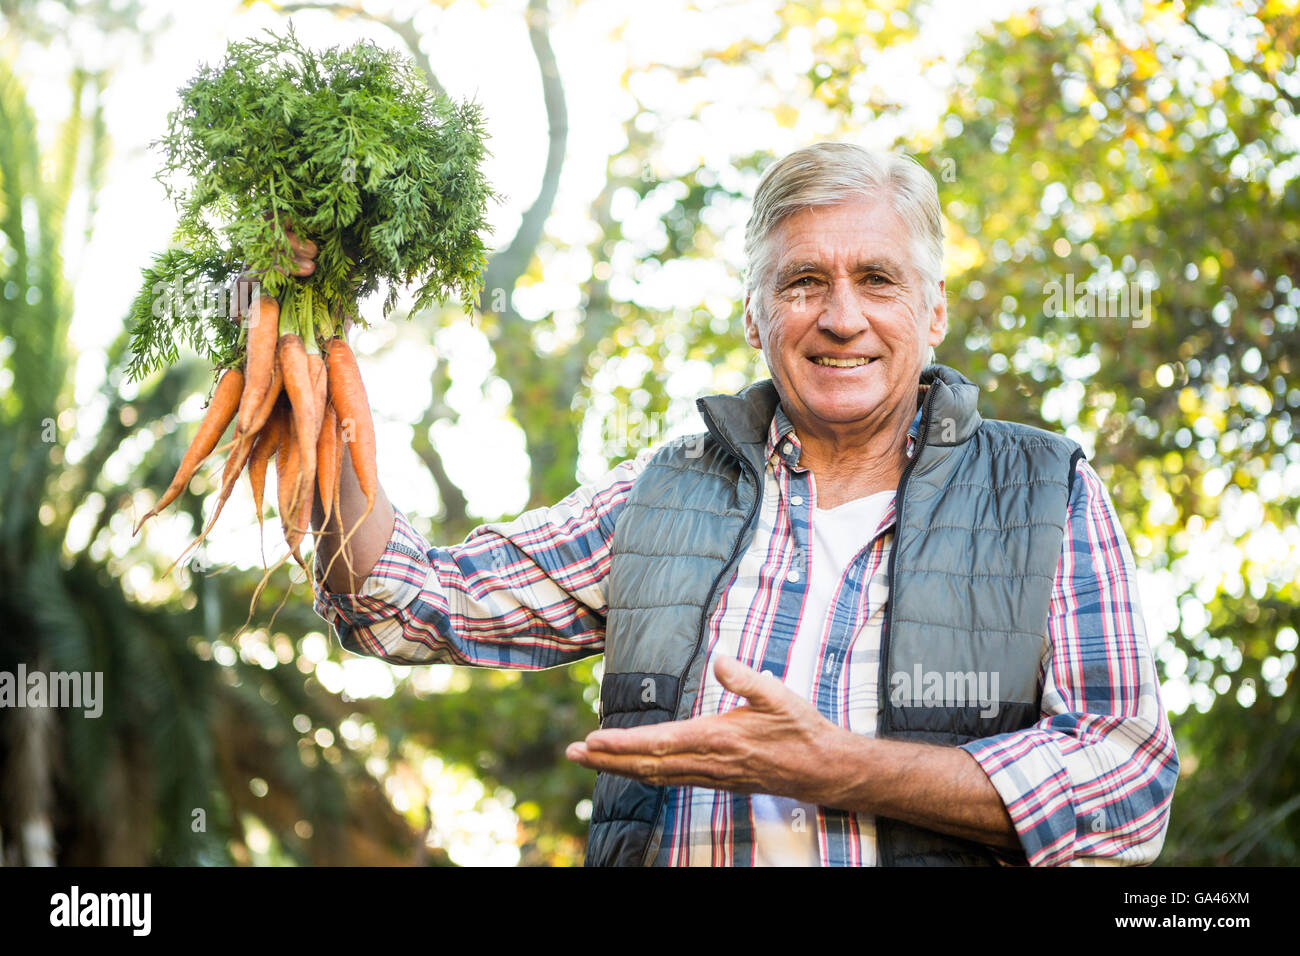 Portrait of mature gardener with carrots at farm Stock Photo